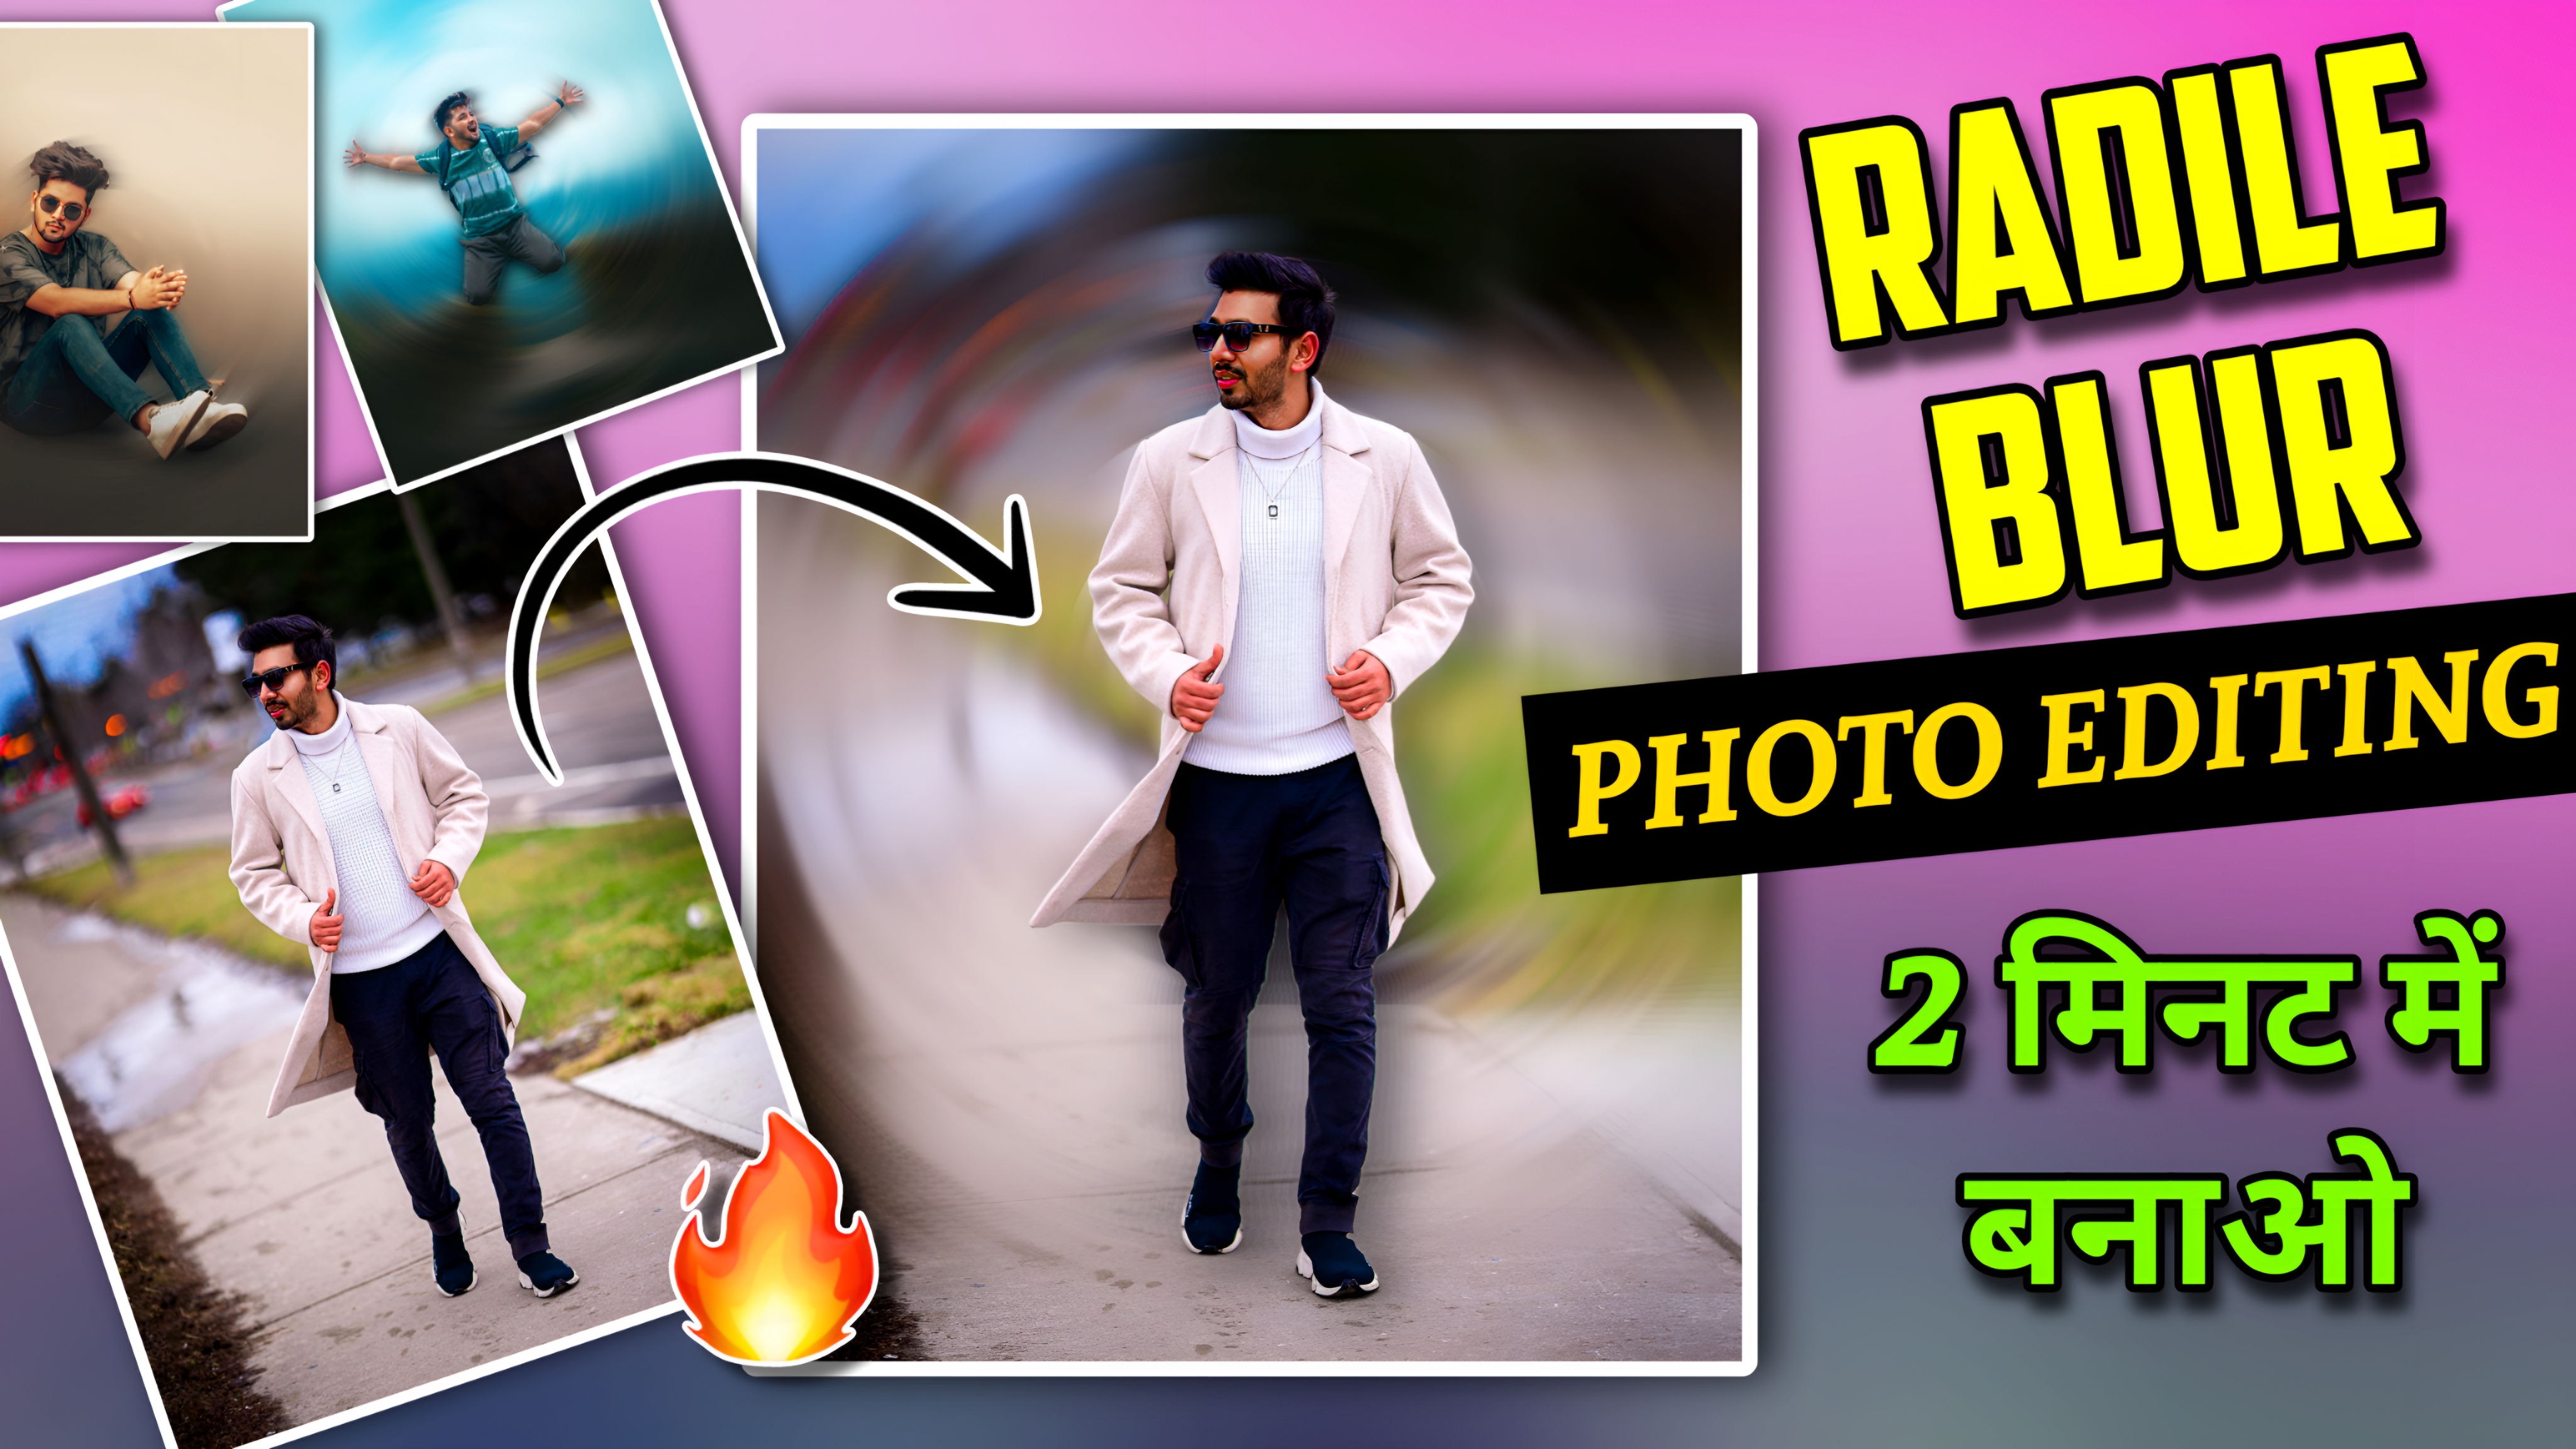 How to make radial Blur Effect Photo || Radial Blur Photo Editing || PicsArt Photo Editing